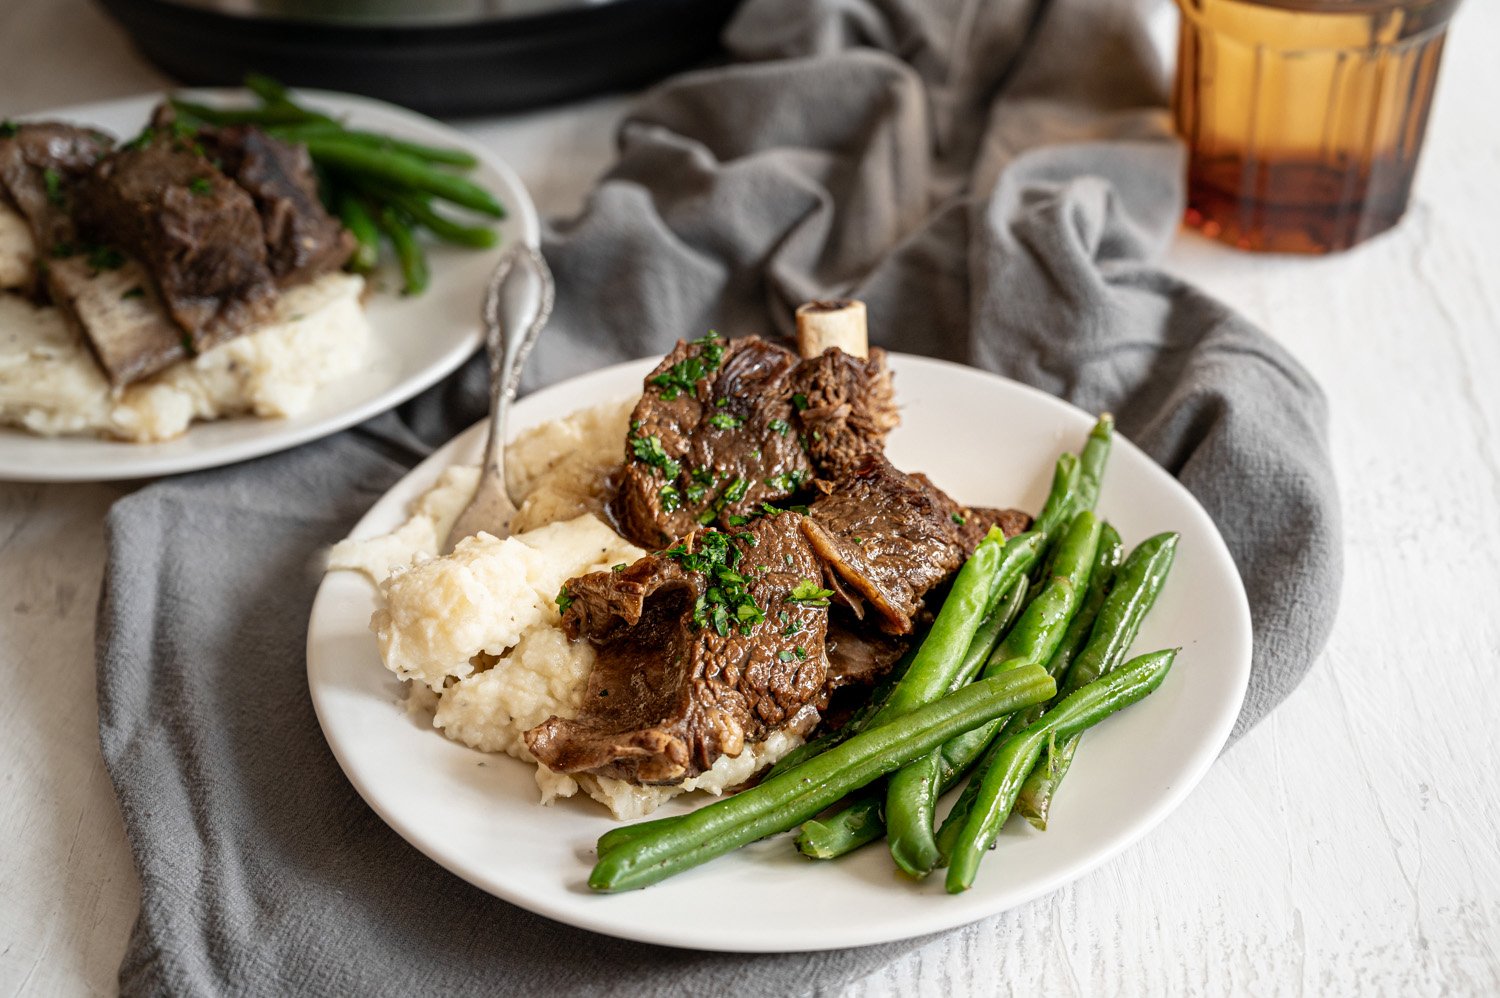 Beef short ribs with mashed potatoes and green beans on a white plate.